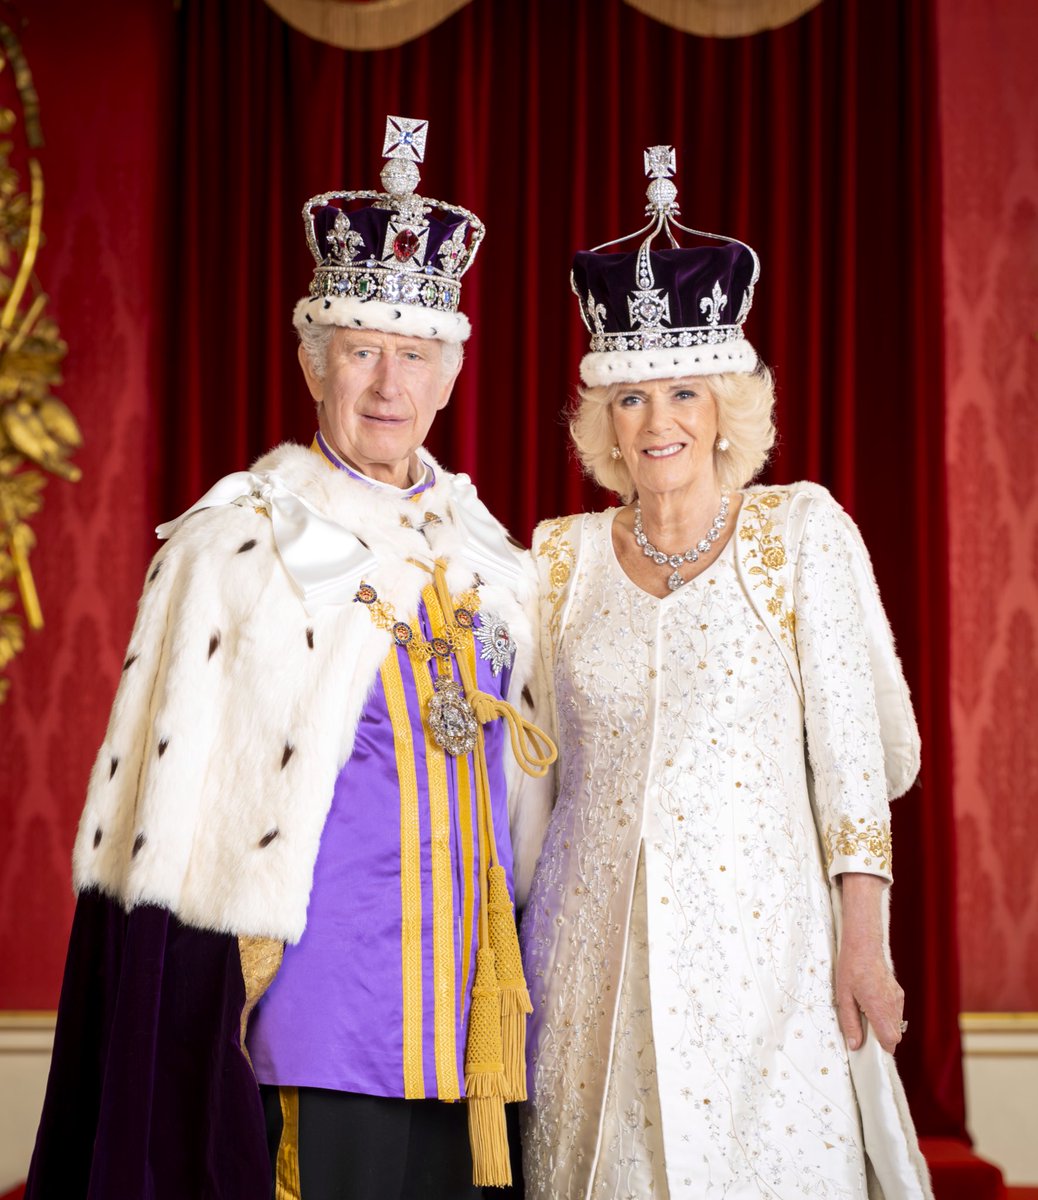 The Coronation of King Charles III and Queen Camilla took place a year ago today.

Their Majesties were crowned at Westminster Abbey on May 6th 2023.